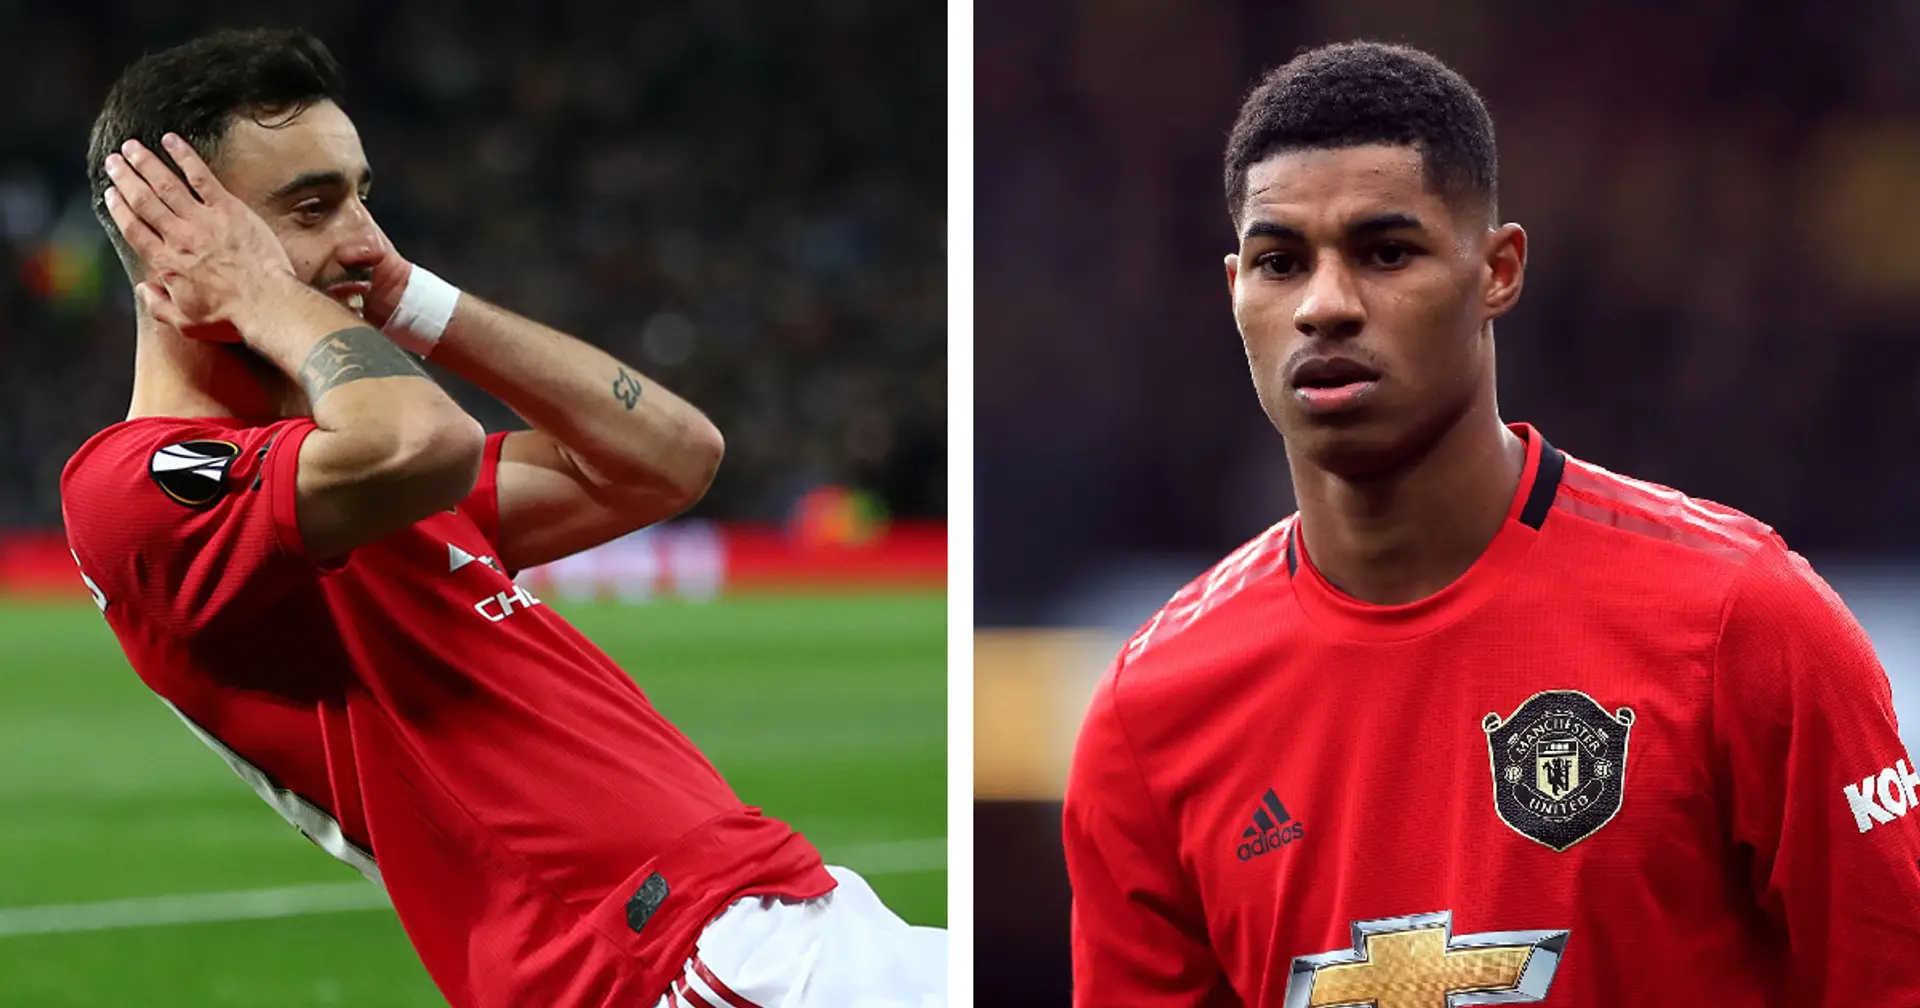 'The most important thing is scoring for Man United': Bruno insists he has no problem with Rashford taking penalties 